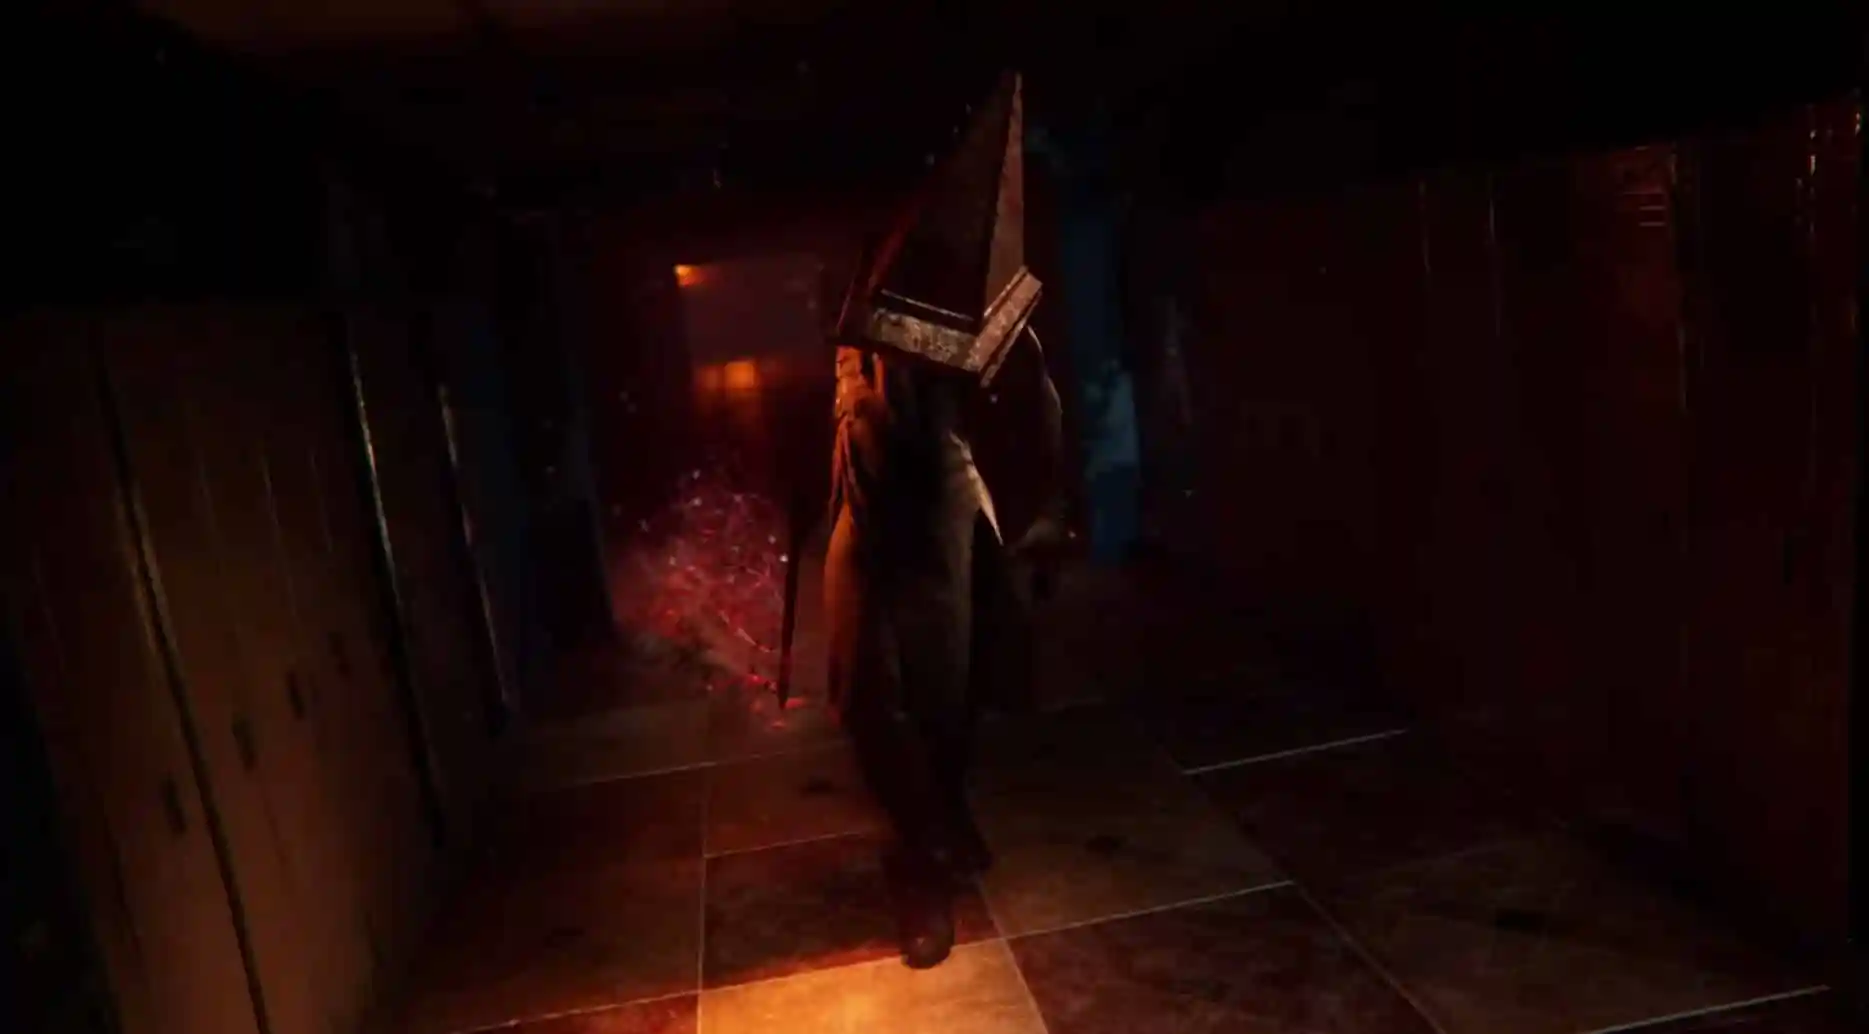 Silent Hill's' Pyramid Head gets 'Dead by Daylight' revamp for